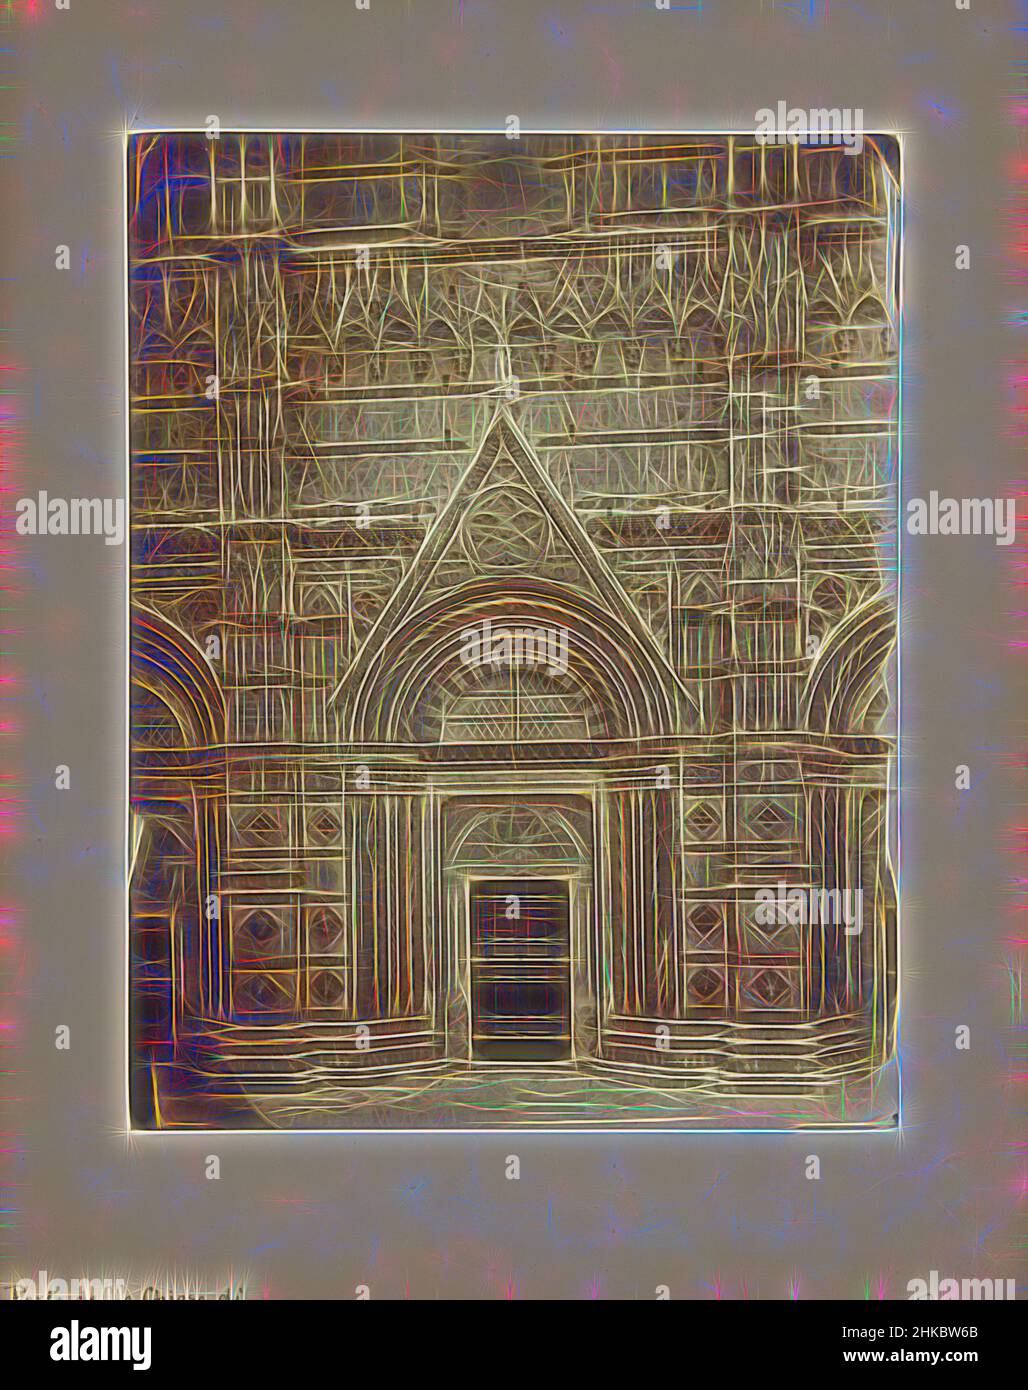 Inspired by Portal of the Battistero di San Giovanni in Siena, Porta della chiesa di S.Giovanni Siena, Siena, c. 1875 - c. 1900, albumen print, height 227 mm × width 176 mm, Reimagined by Artotop. Classic art reinvented with a modern twist. Design of warm cheerful glowing of brightness and light ray radiance. Photography inspired by surrealism and futurism, embracing dynamic energy of modern technology, movement, speed and revolutionize culture Stock Photo